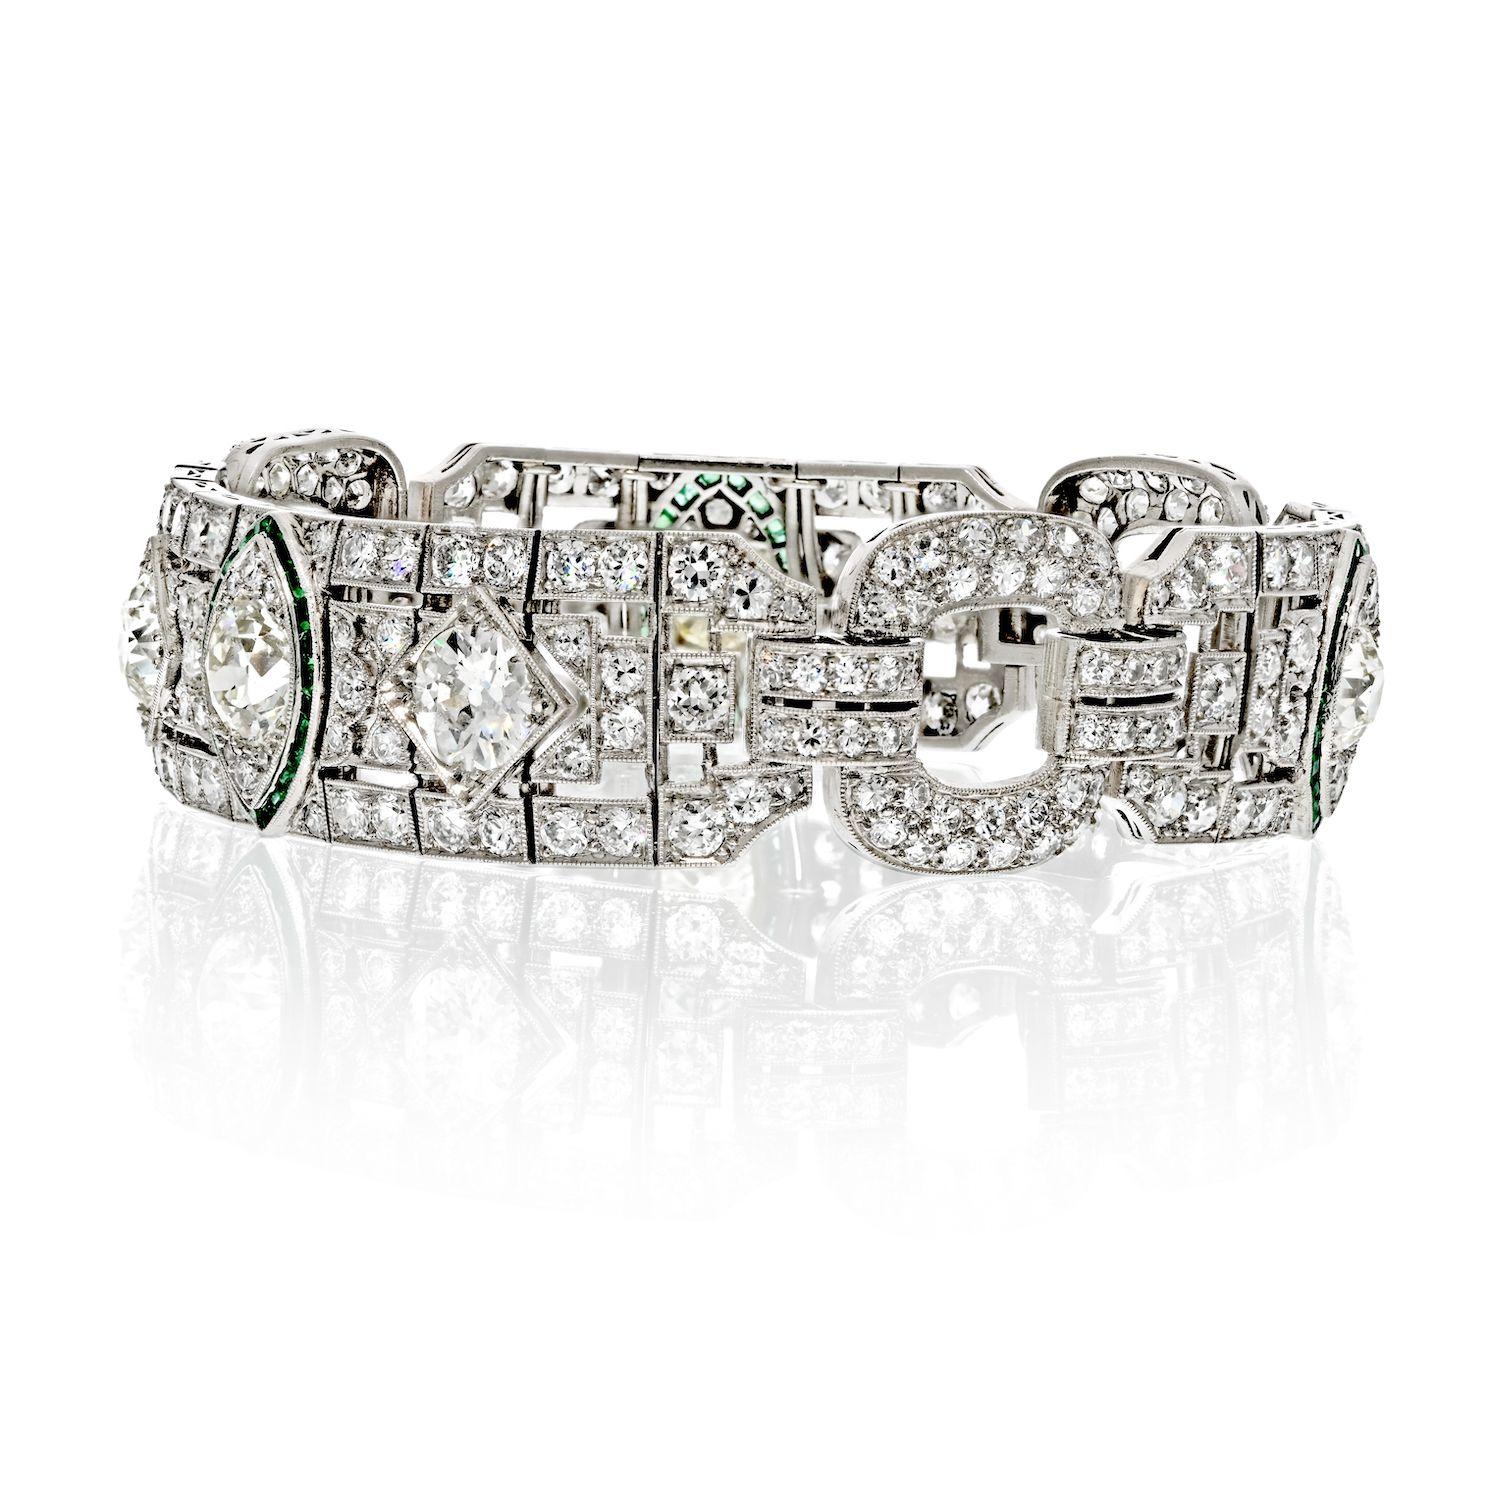 Elevate your jewelry collection with the timeless elegance of this exquisite Platinum Art Deco Bracelet. Crafted with meticulous attention to detail, this bracelet showcases the impeccable craftsmanship of the Art Deco era.

The bracelet is